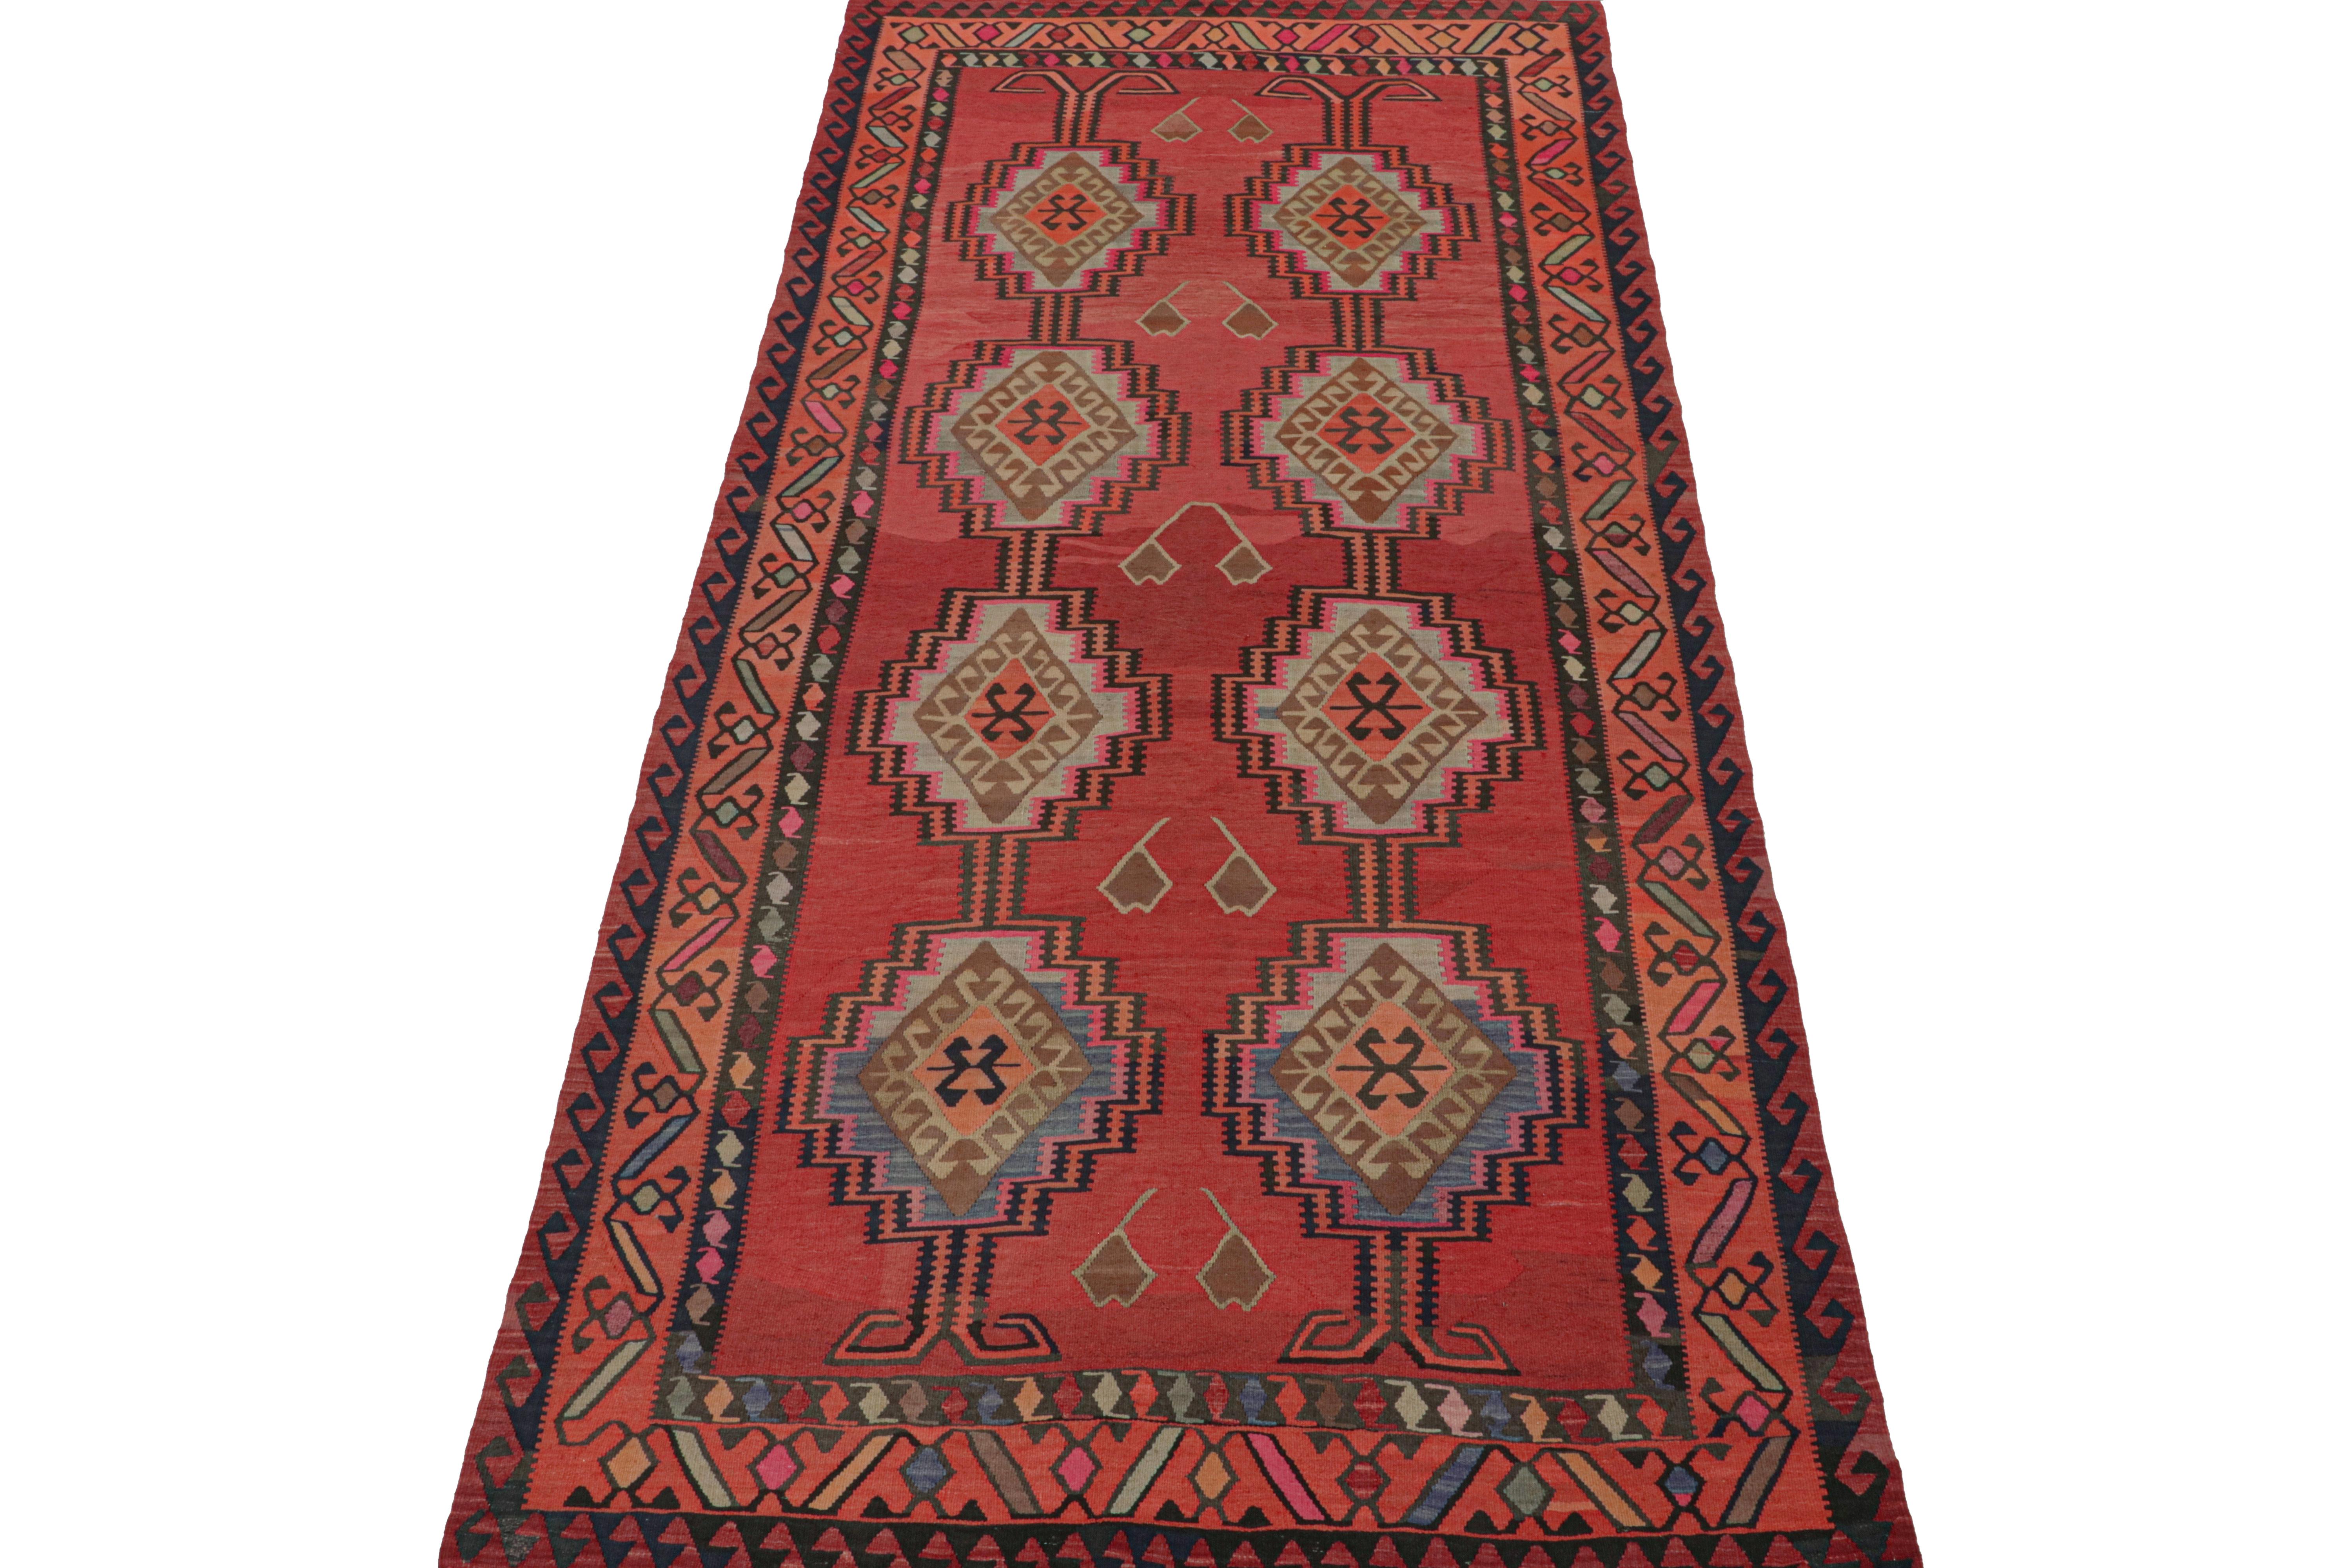 This vintage 6x13 Persian Kilim is believed to be a tribal rug from Meshkin—a small northwestern village known for its fabulous works. Handwoven in wool, it originates circa 1950-1960. 

Its design favors medallions and other traditional geometric